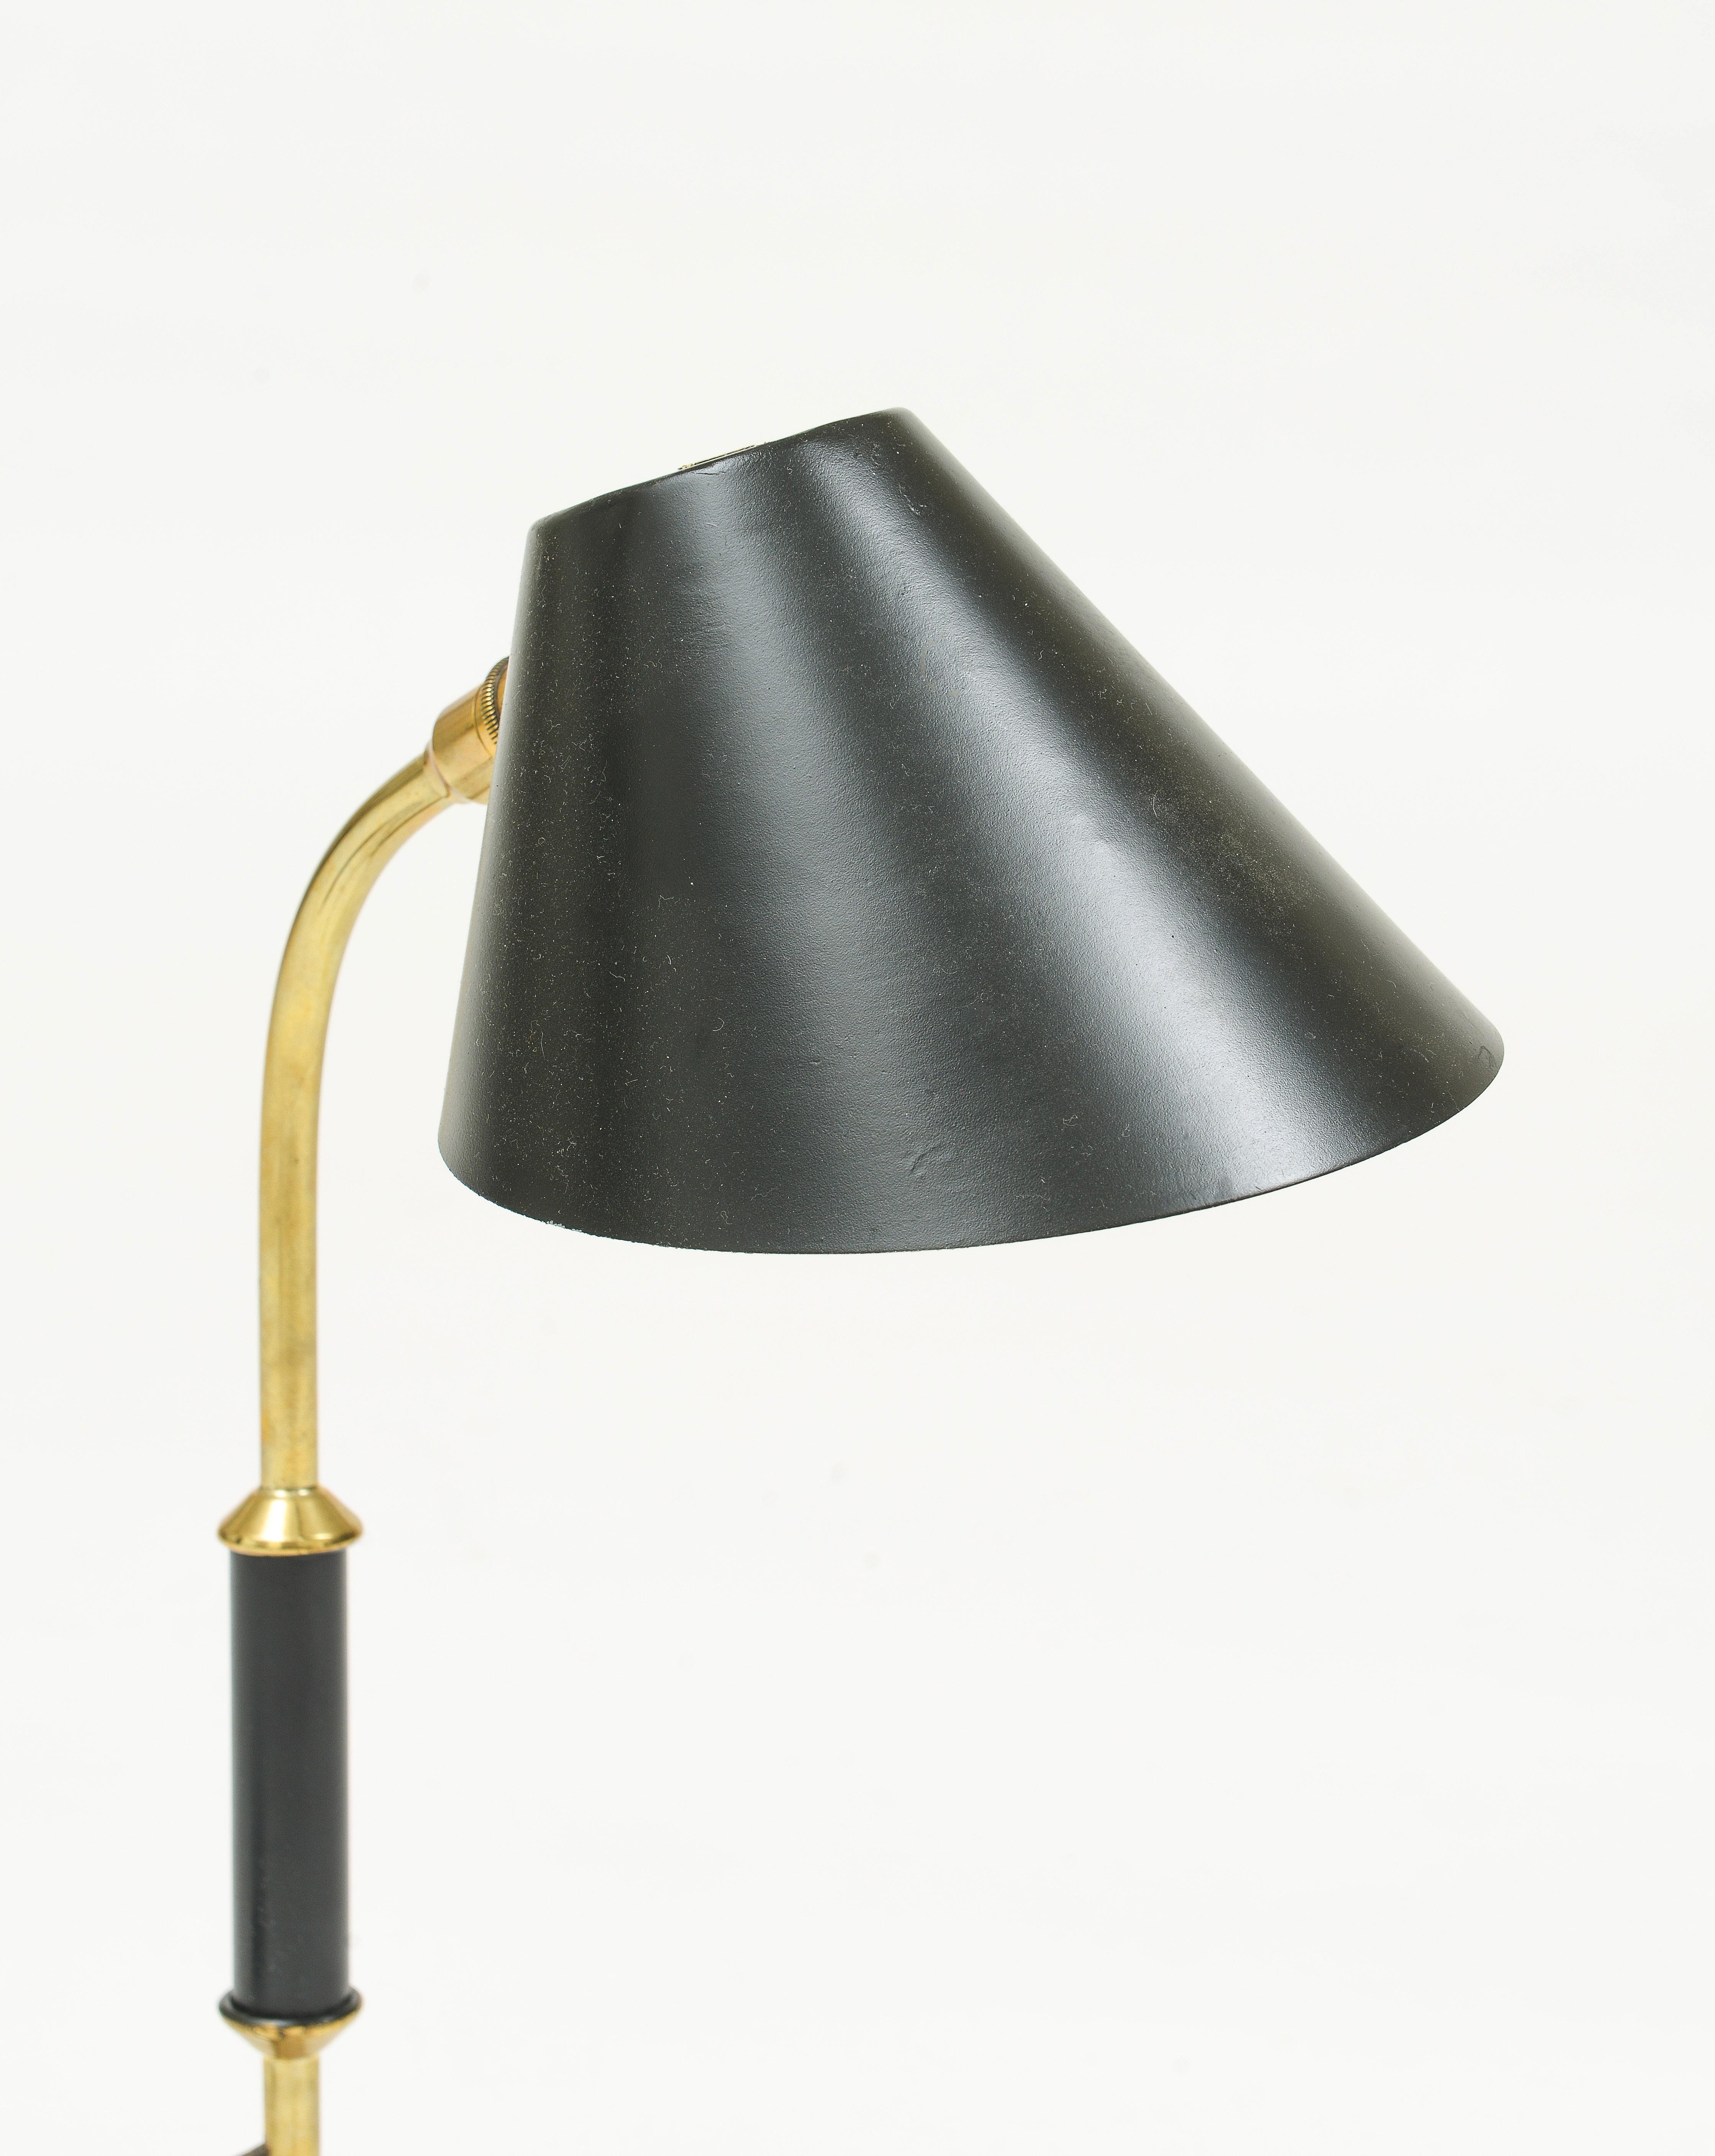 French Chic Handsome Robert Mathieu Lunel Brass and Black Table Lamp, France, 1950's For Sale